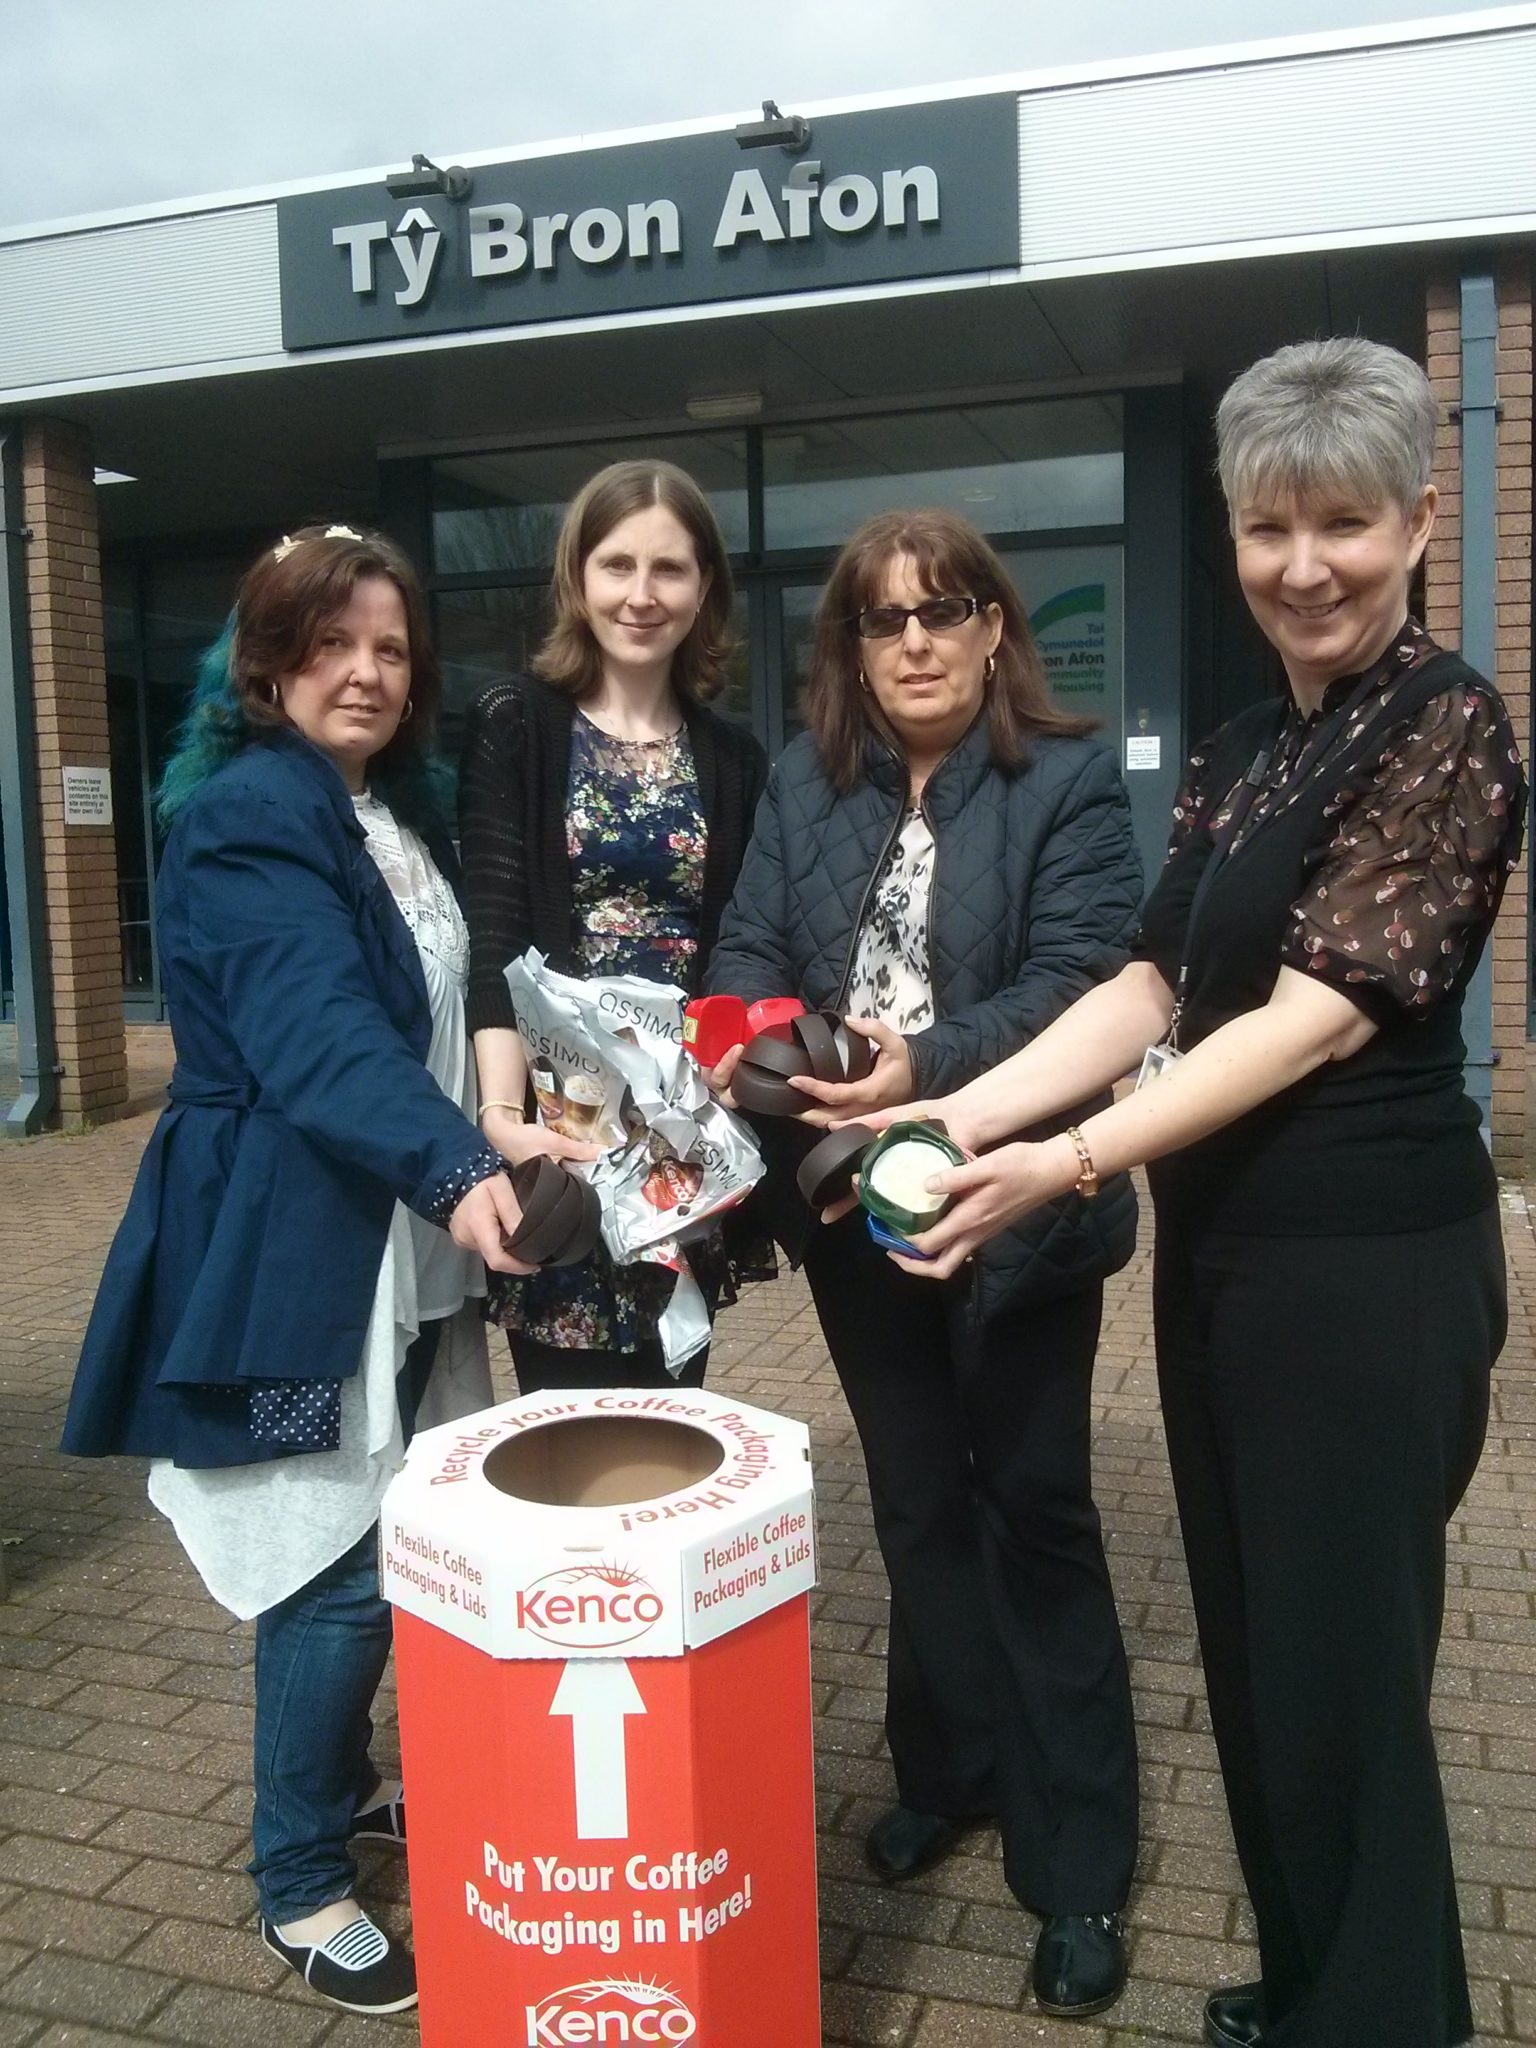 Angela Locke (Chair of the St Dials group), Kirsty Hopkins (Treasurer), Deb Rhodes (Secretary) and Tracey James, community housing officer for St Dials with the coffee recycling box at Bron Afon